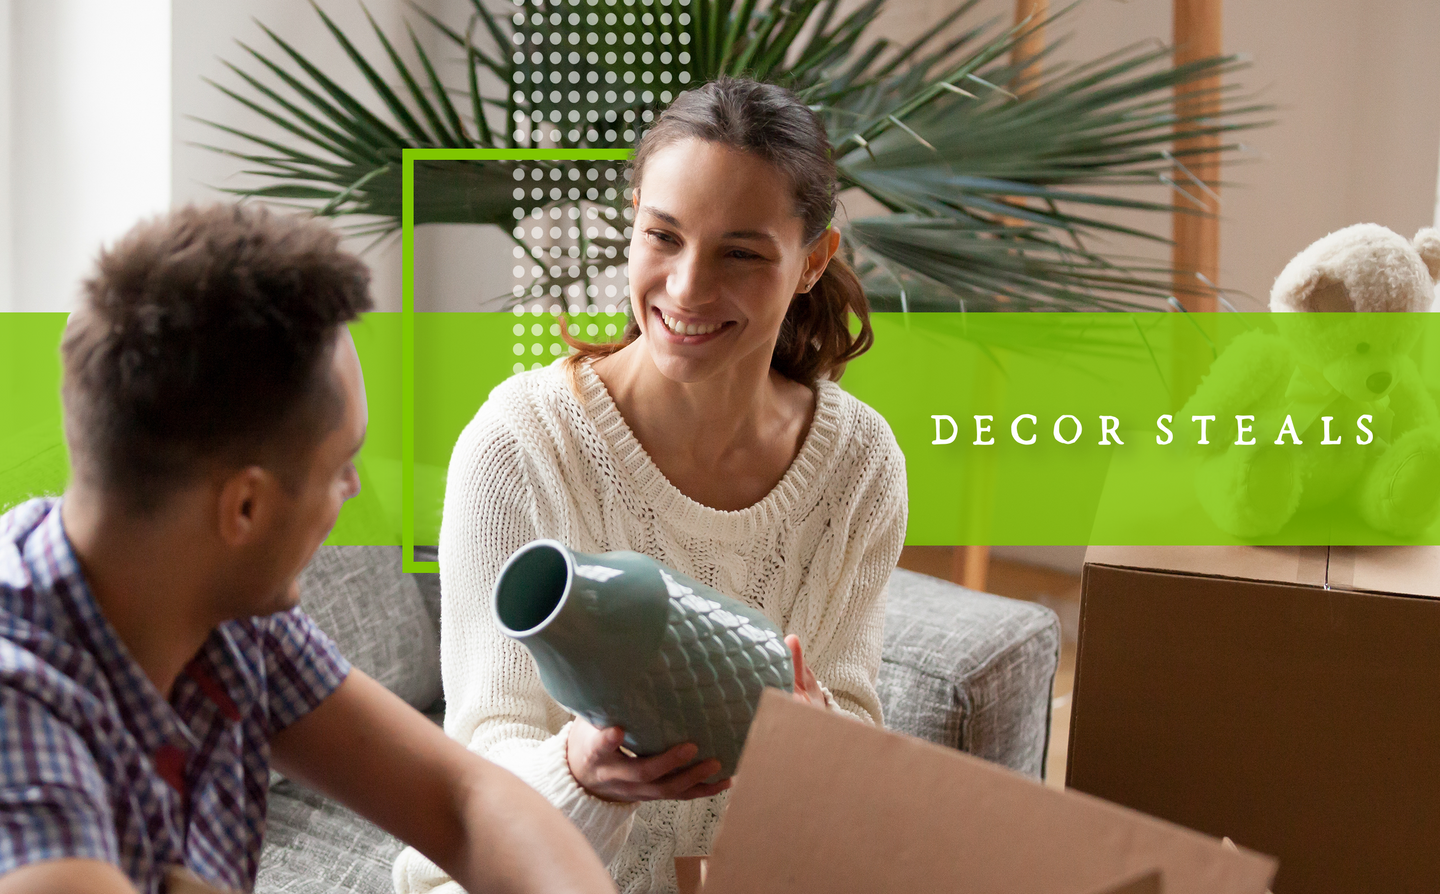 Decor Steals sees a 2.6% conversion increase testing TrustedSite